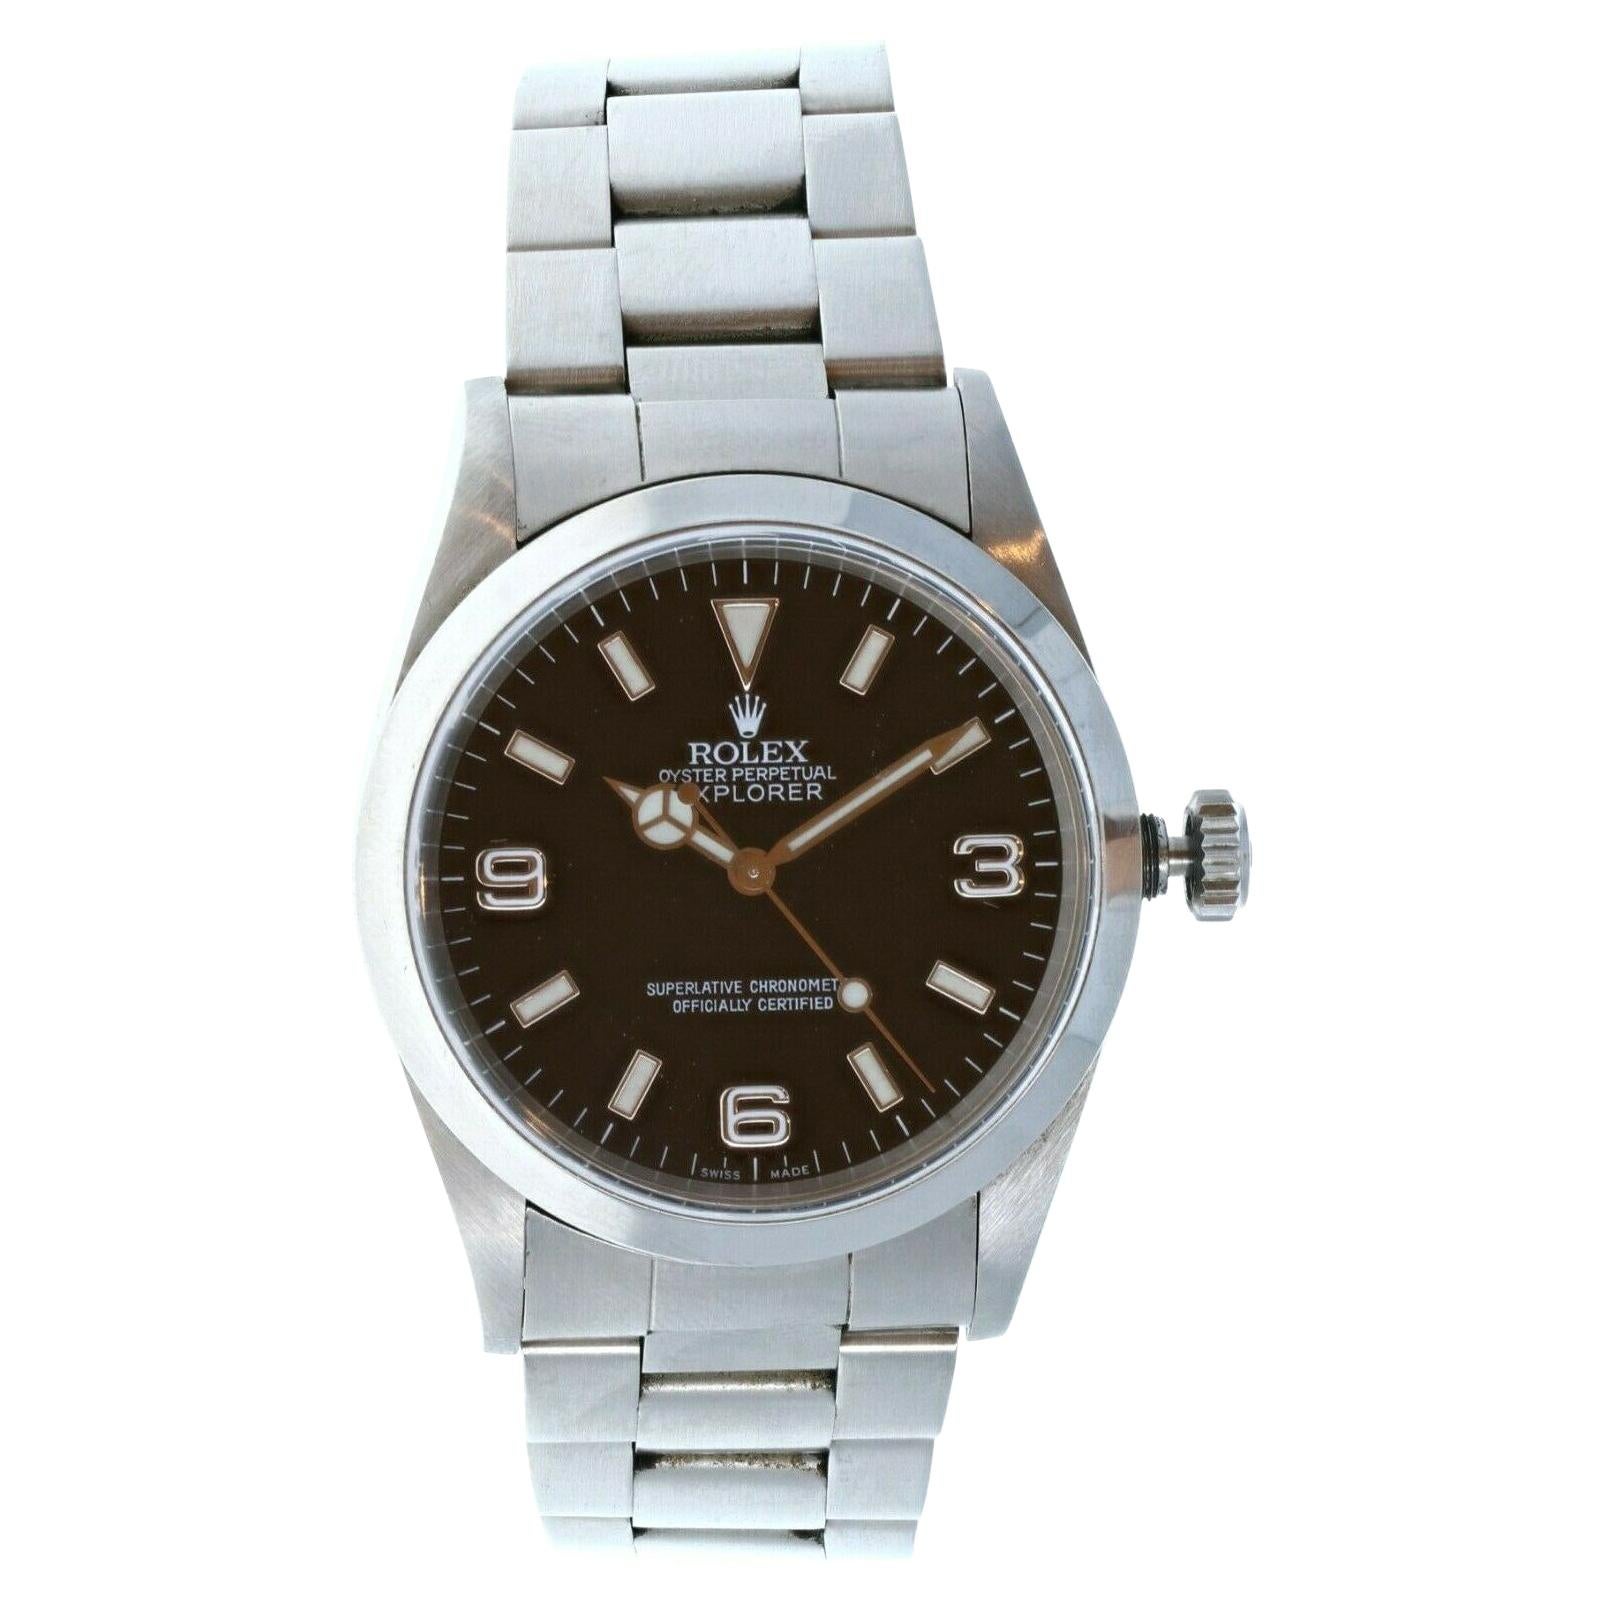 Rolex Explorer I 14270 Stainless Steel with Papers For Sale